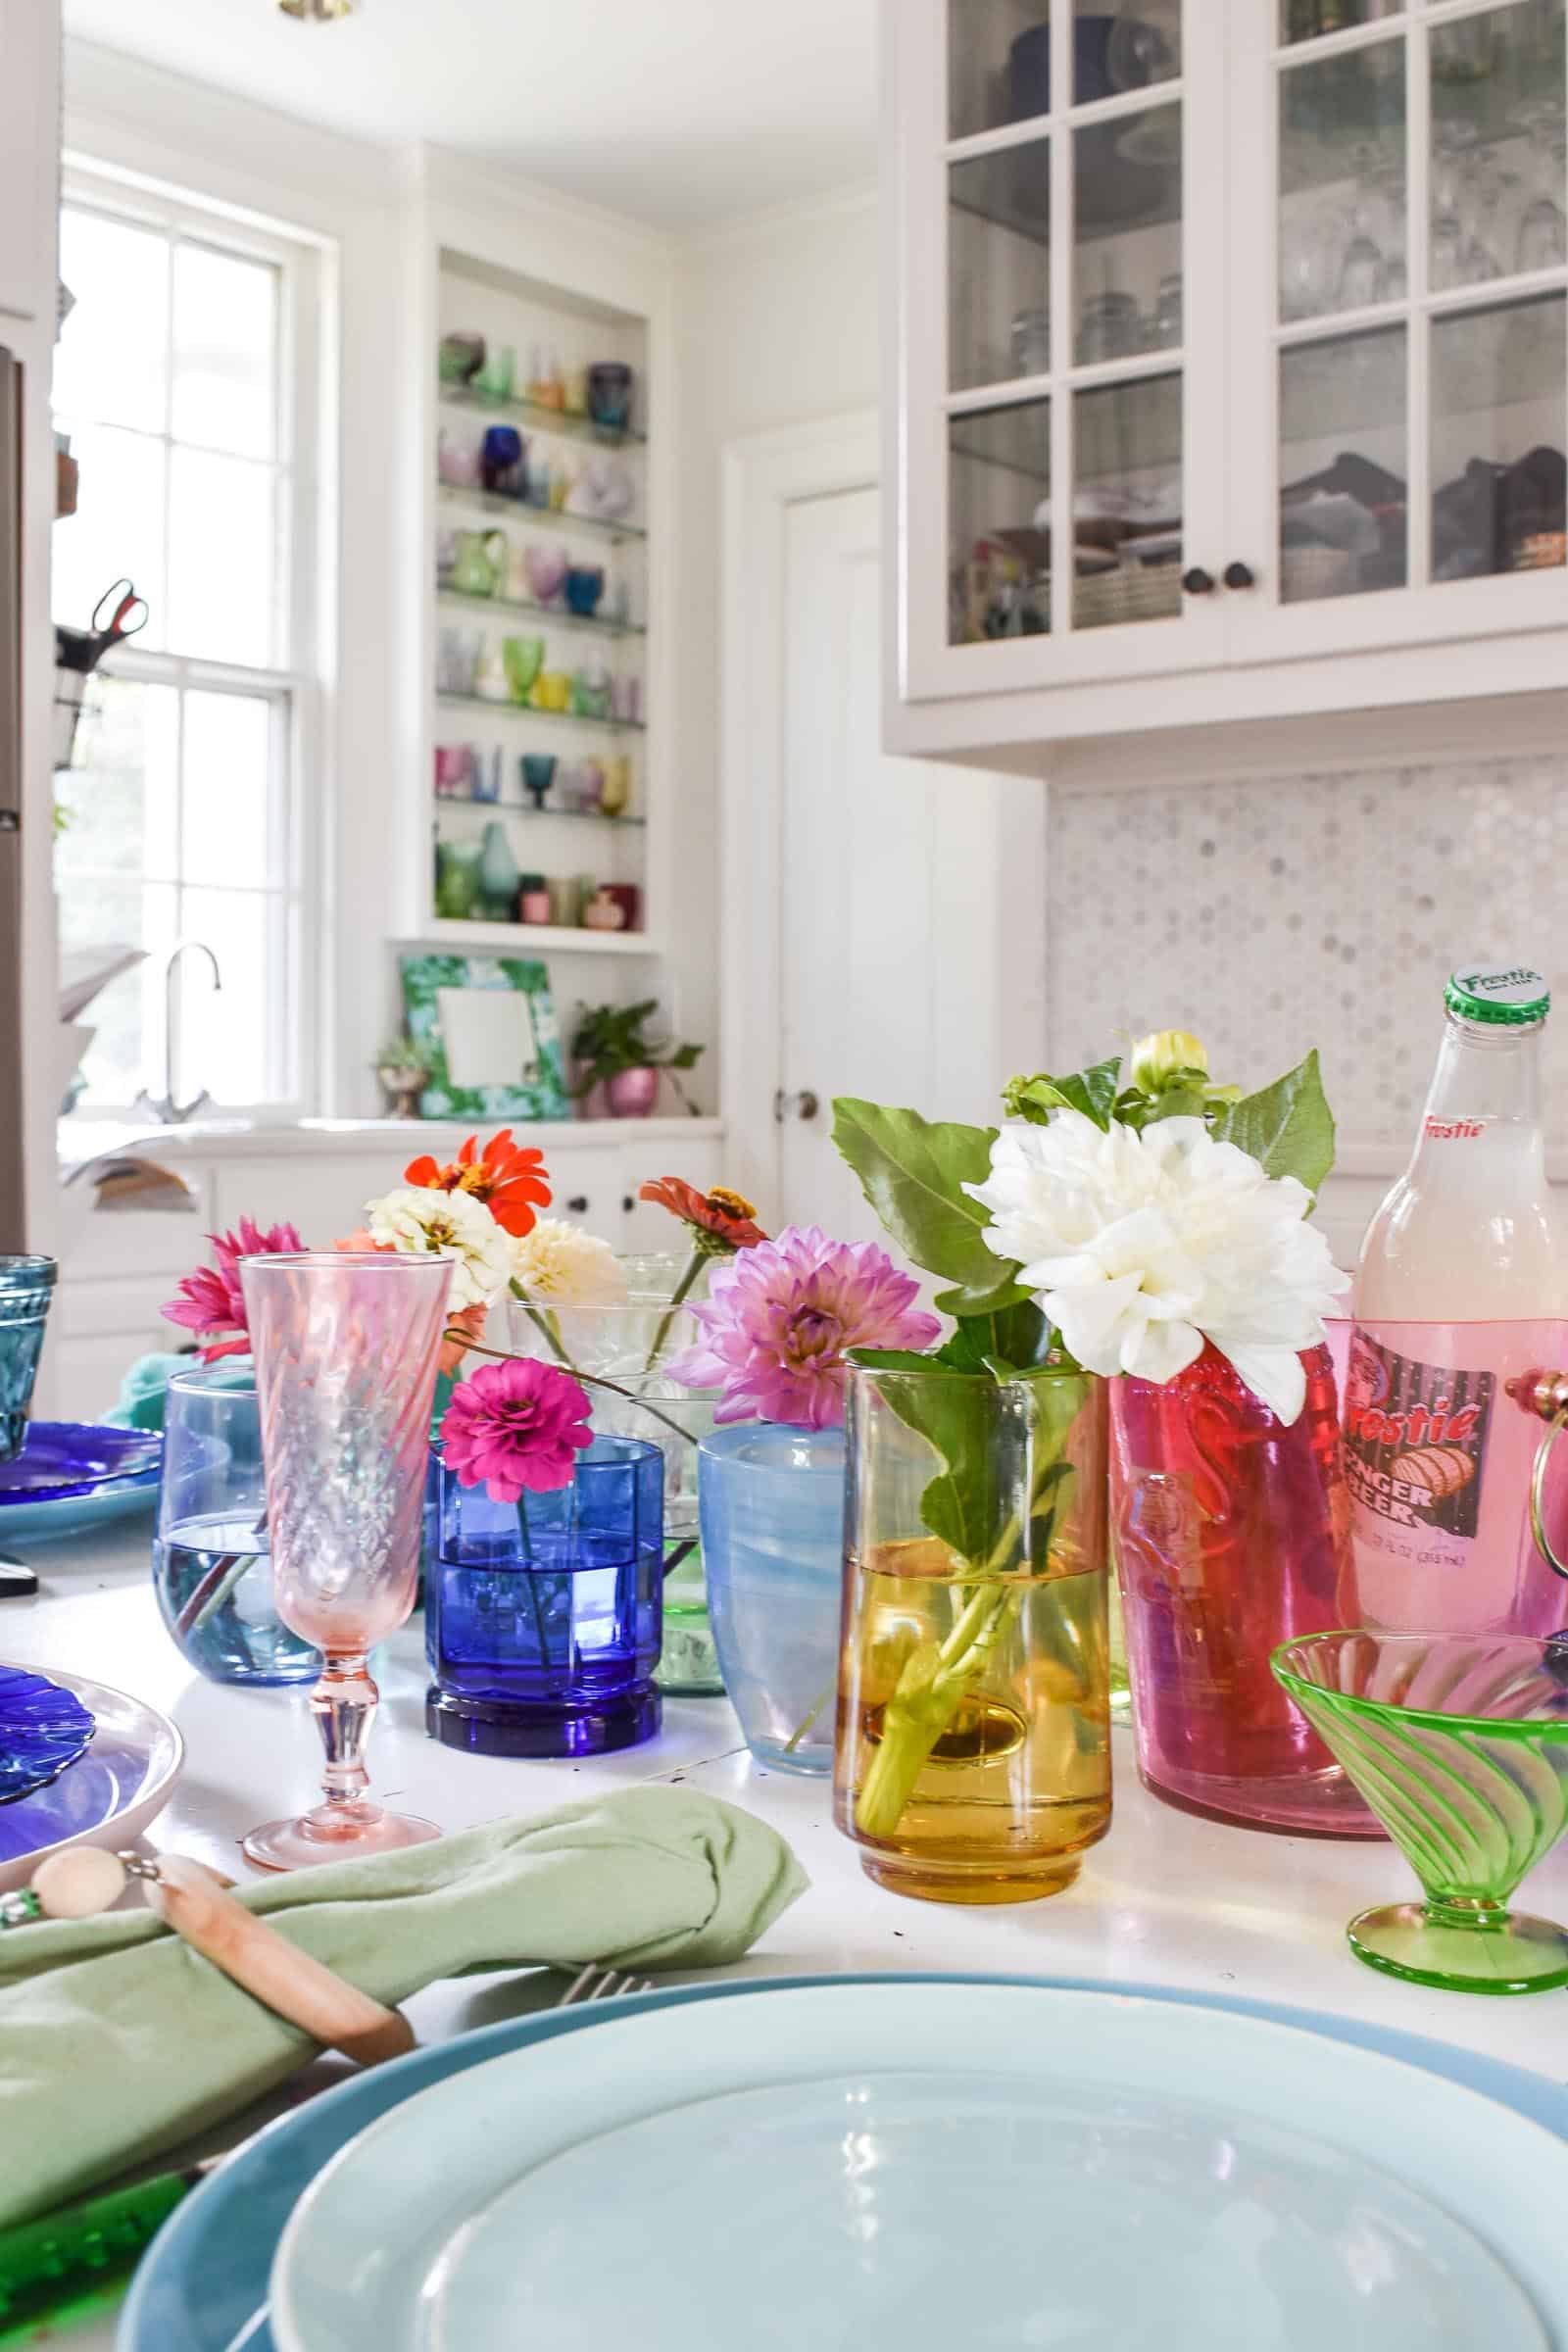 using rainbow glass to set a colorful table